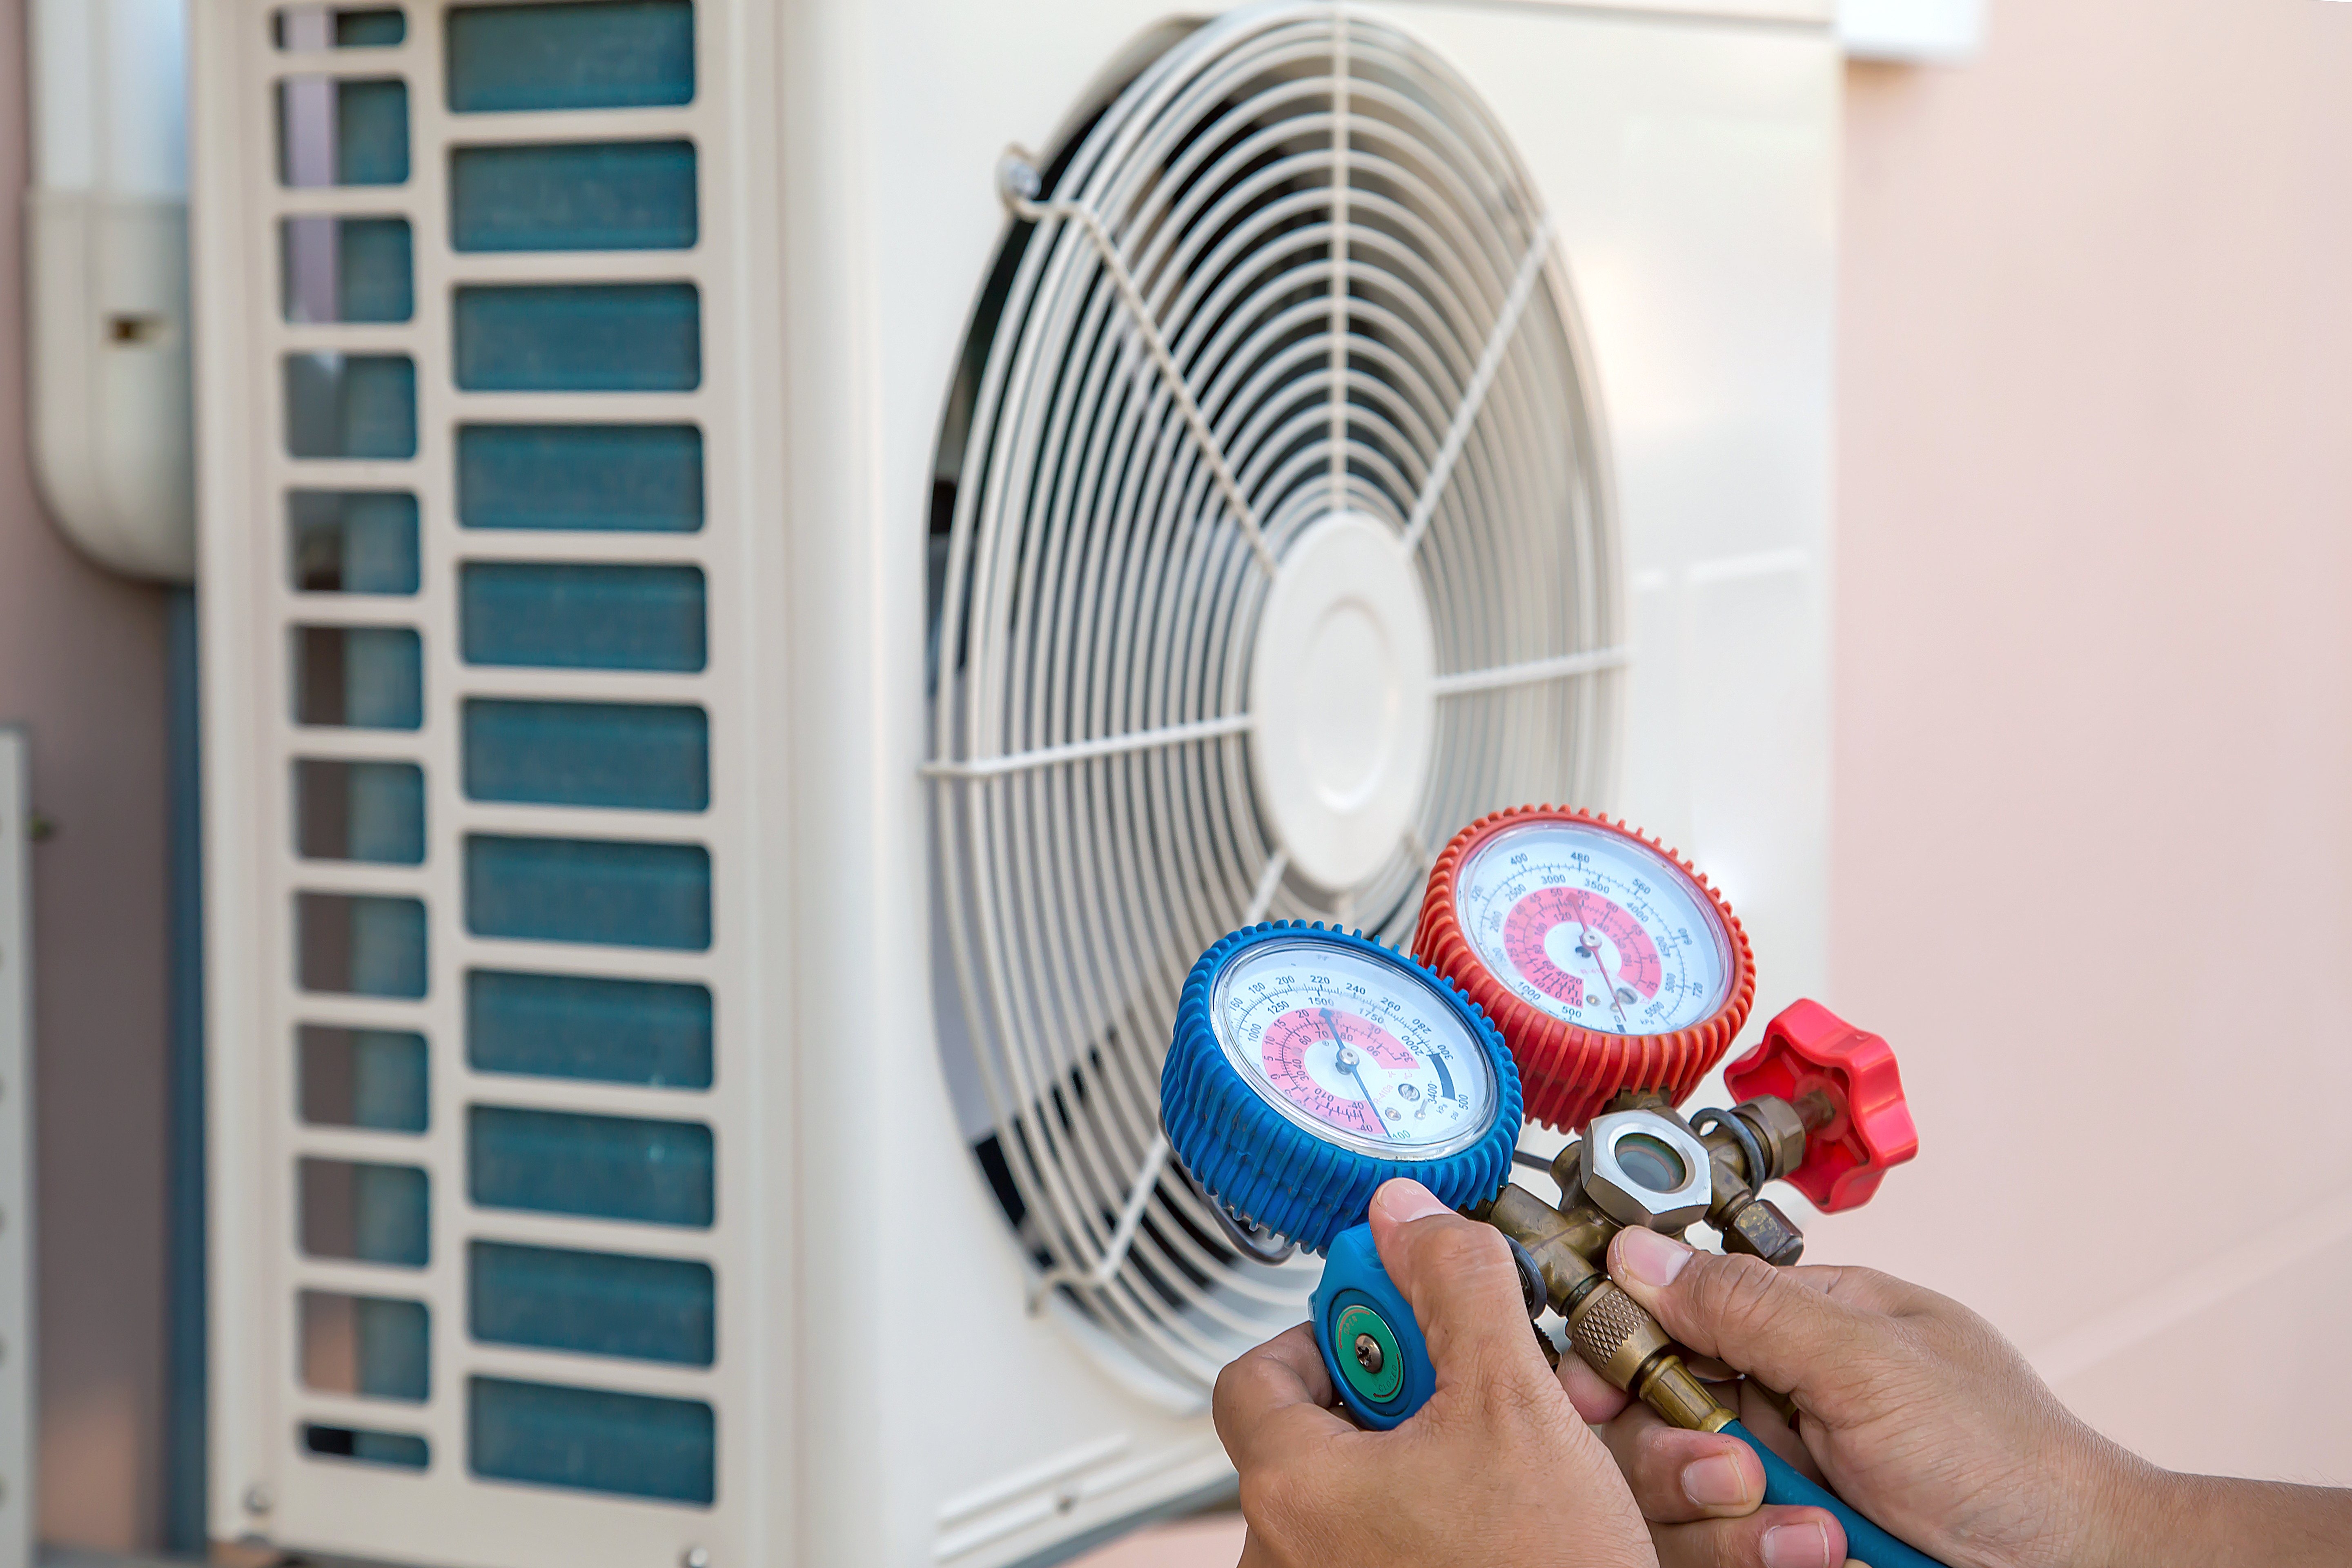 technician-using-measuring-equipment-filling-air-conditioners-checking-outdoor-air-compressor-unit